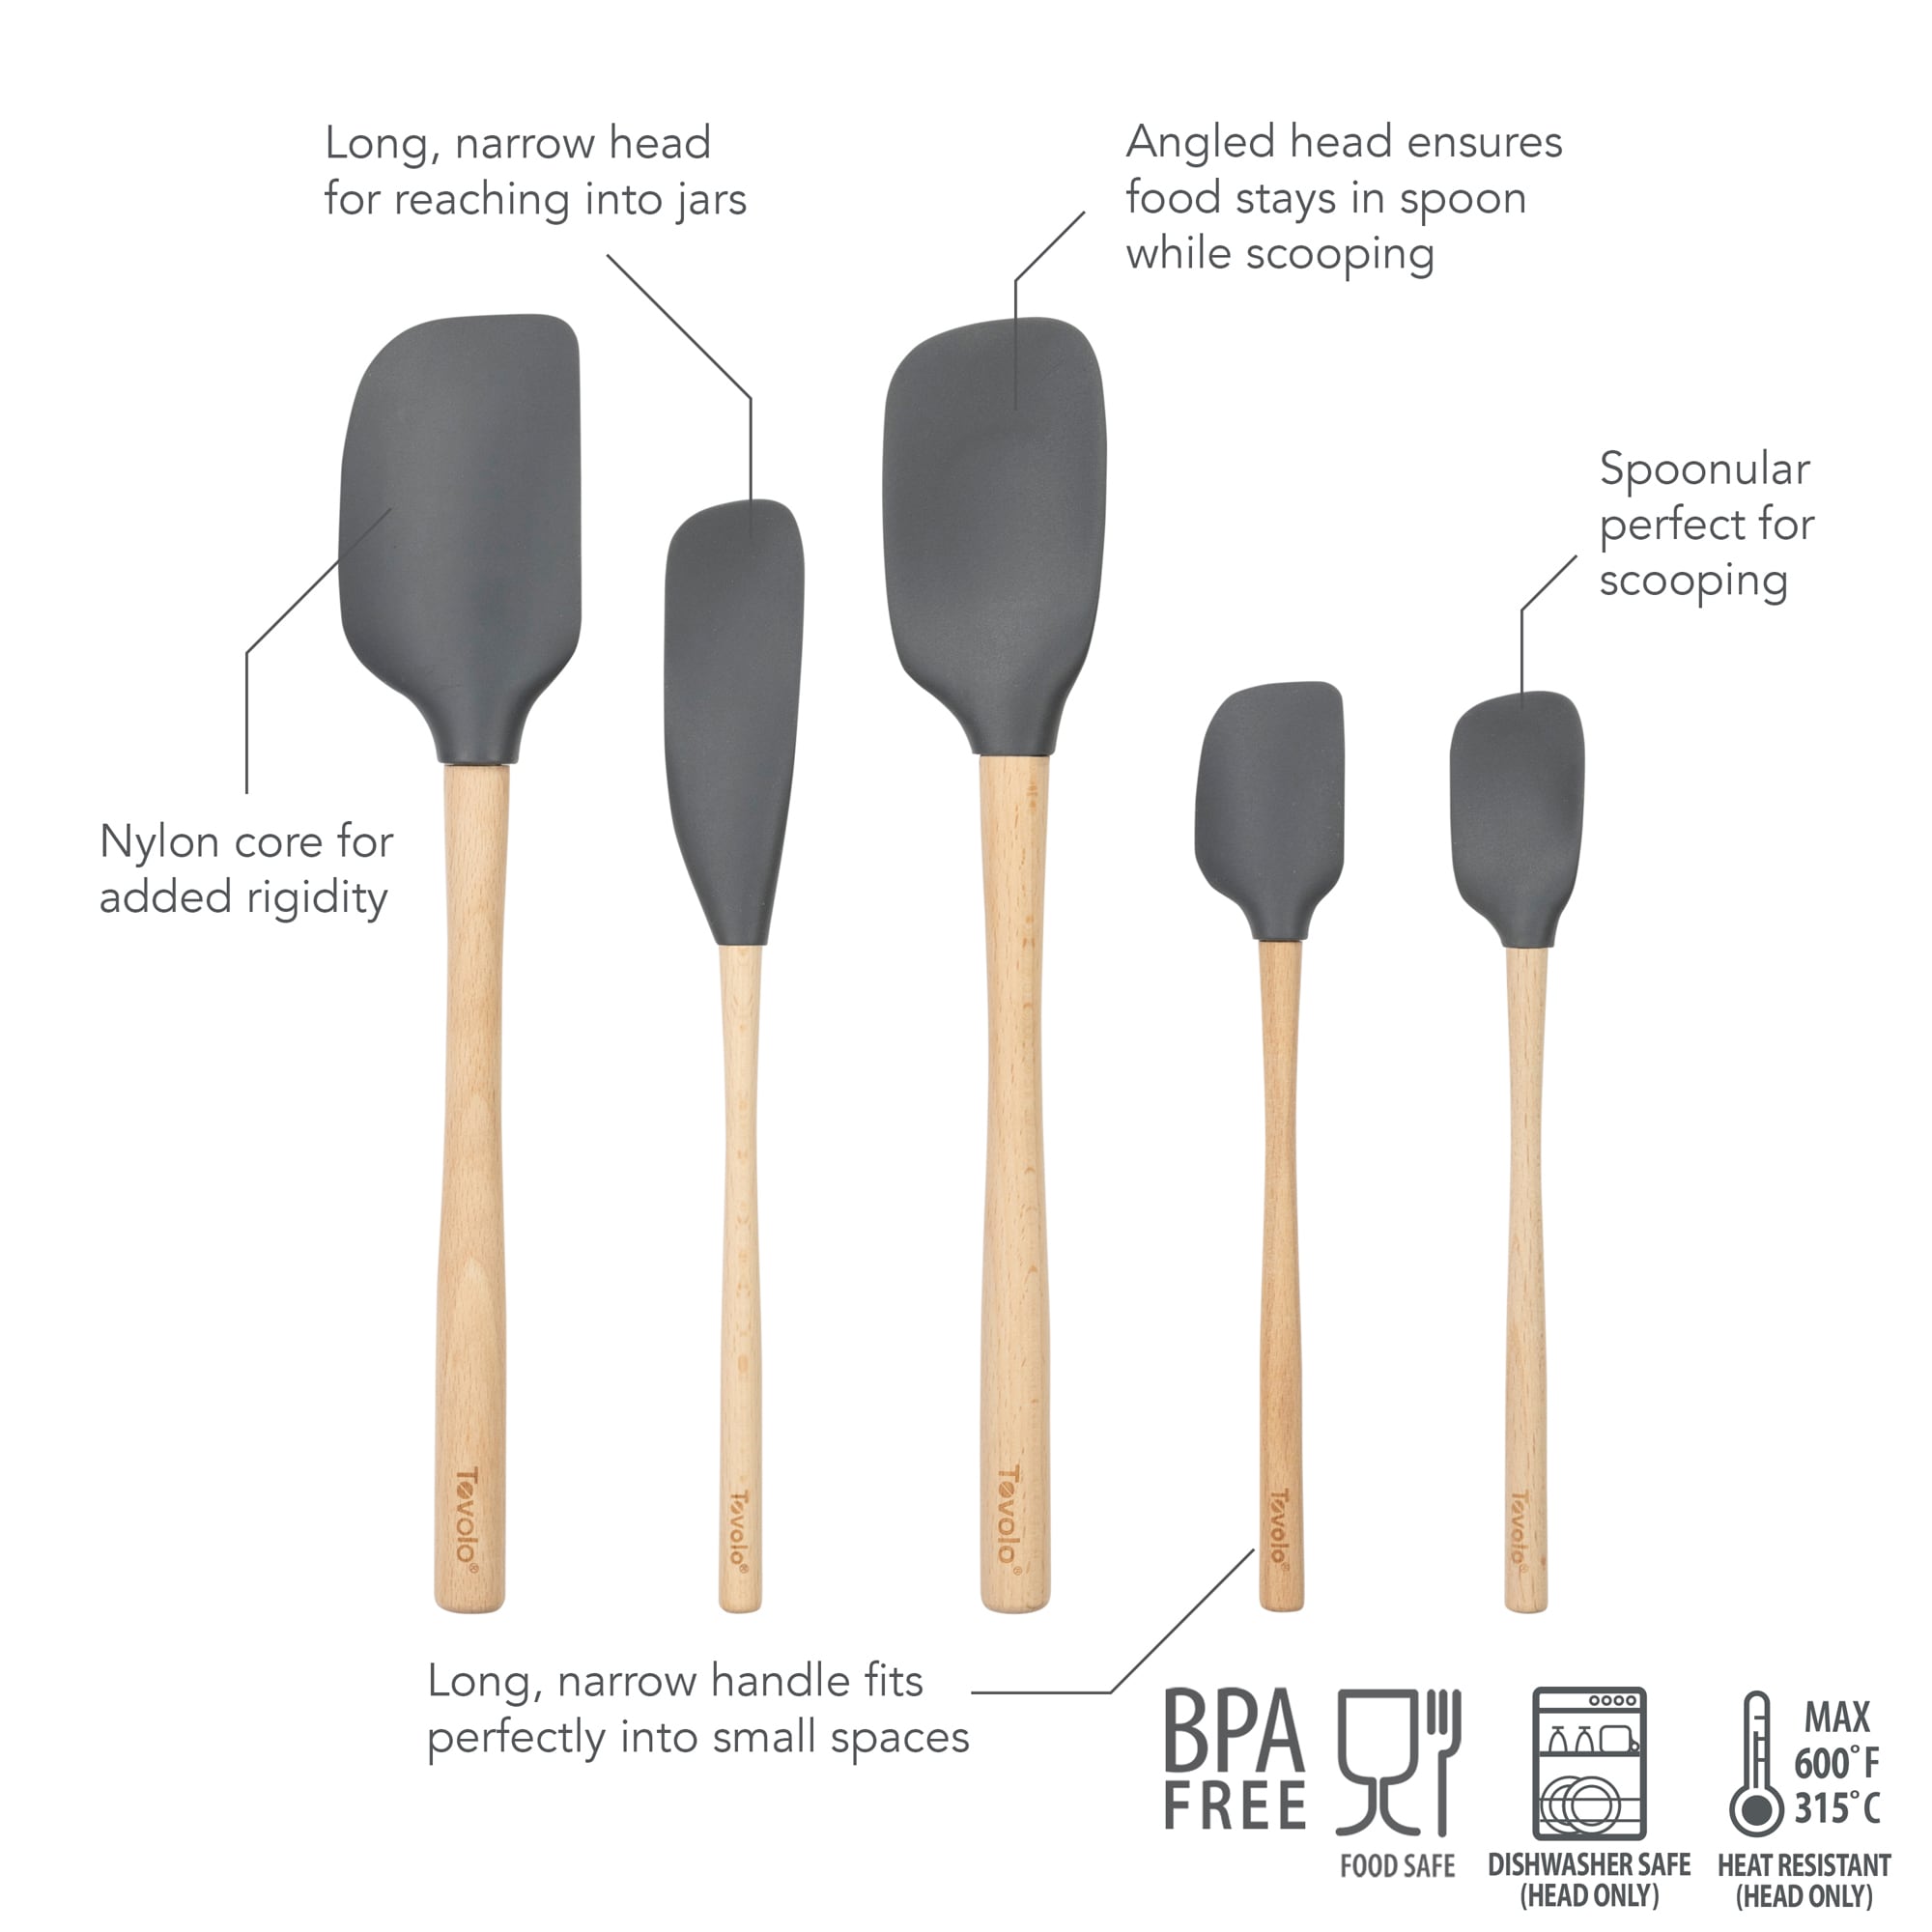 All Silicone Mini Spatula & Spoon, Oyster Gray - Cook on Bay